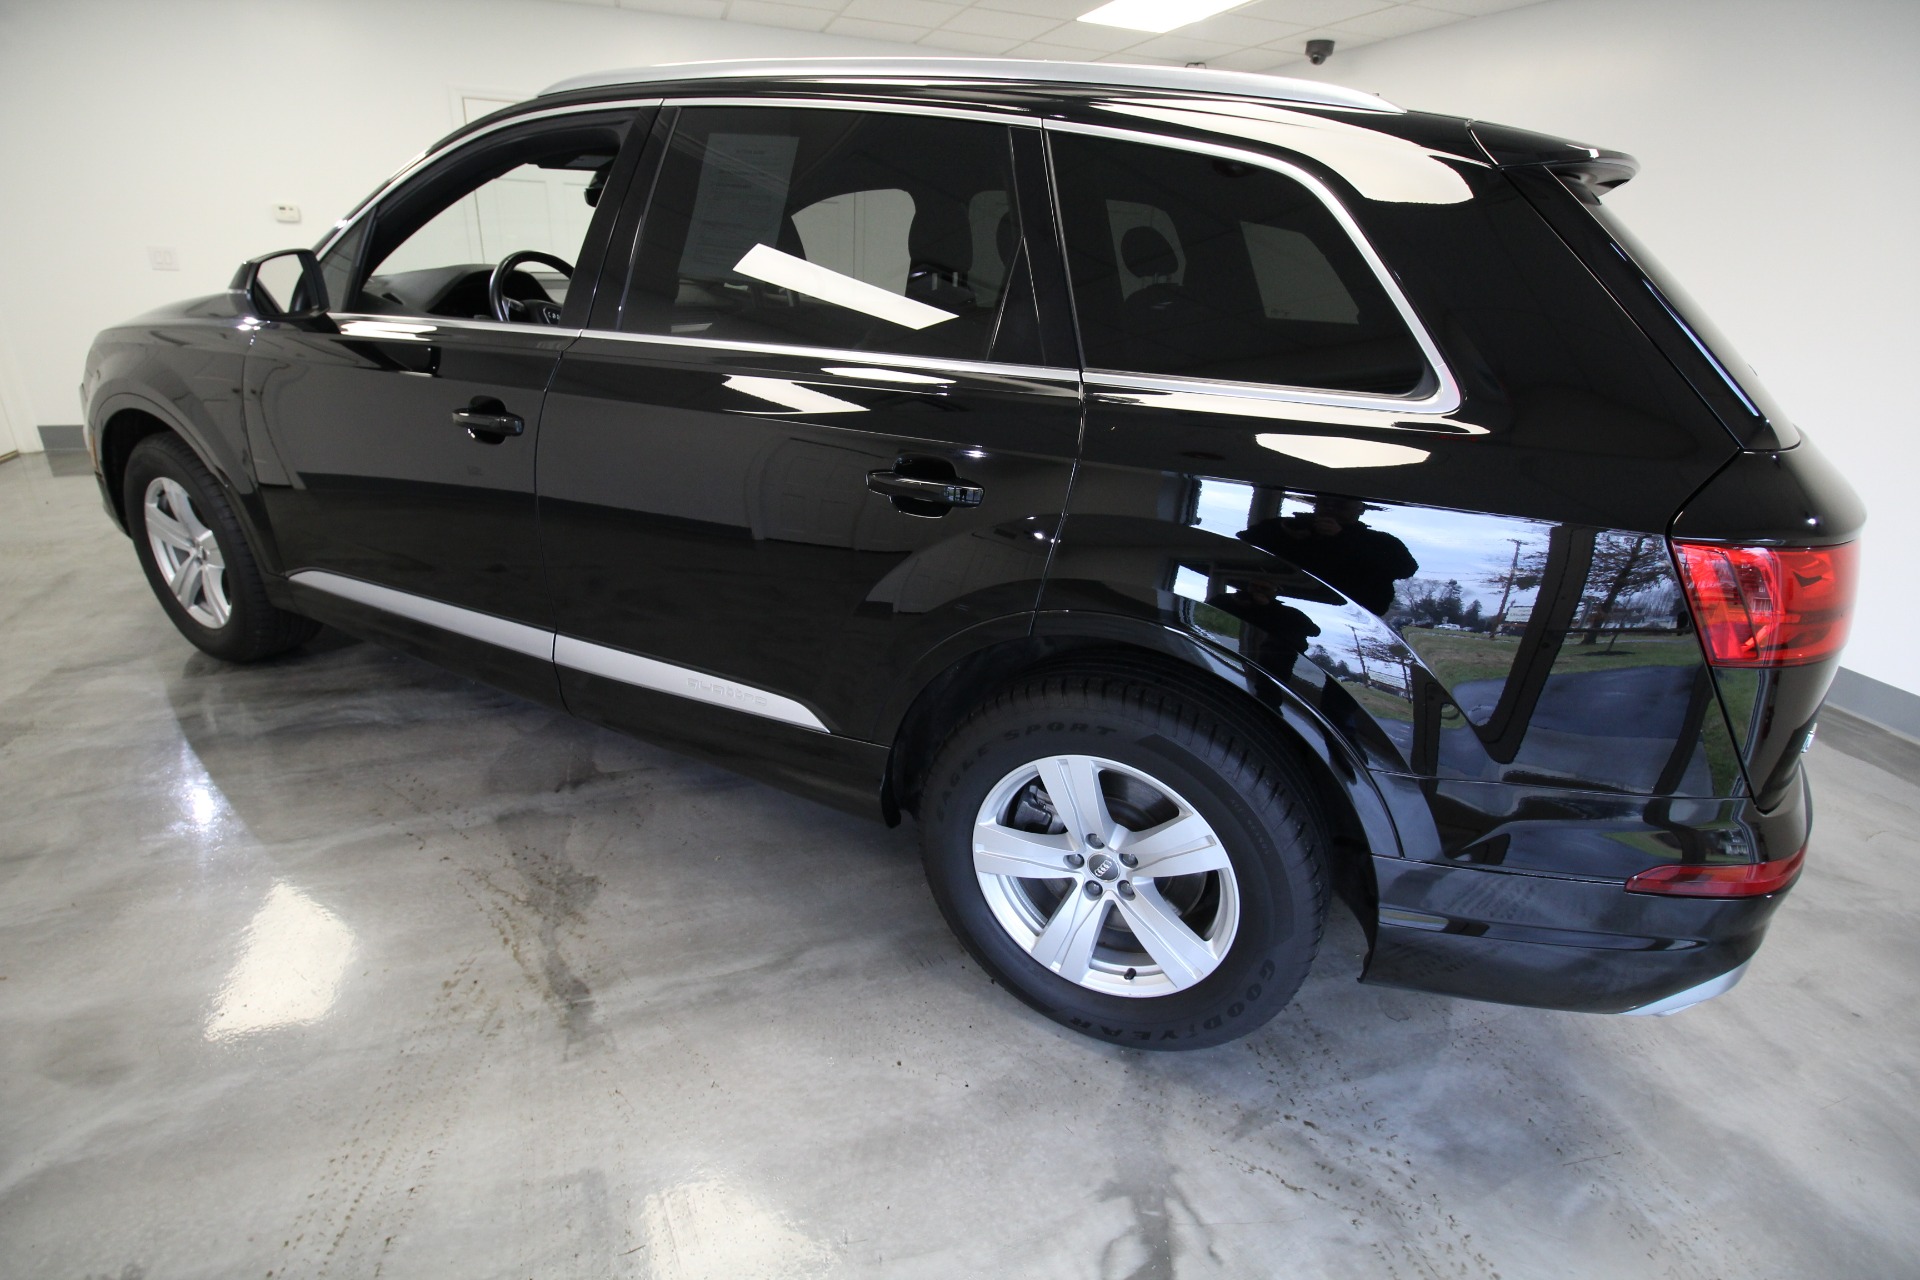 Used 2019 BLACK Audi Q7 2.0 PREMIUM QUATTRO LOADED W/OPTIONS NAVIGATION BLIND SPOT AND MORE | Albany, NY